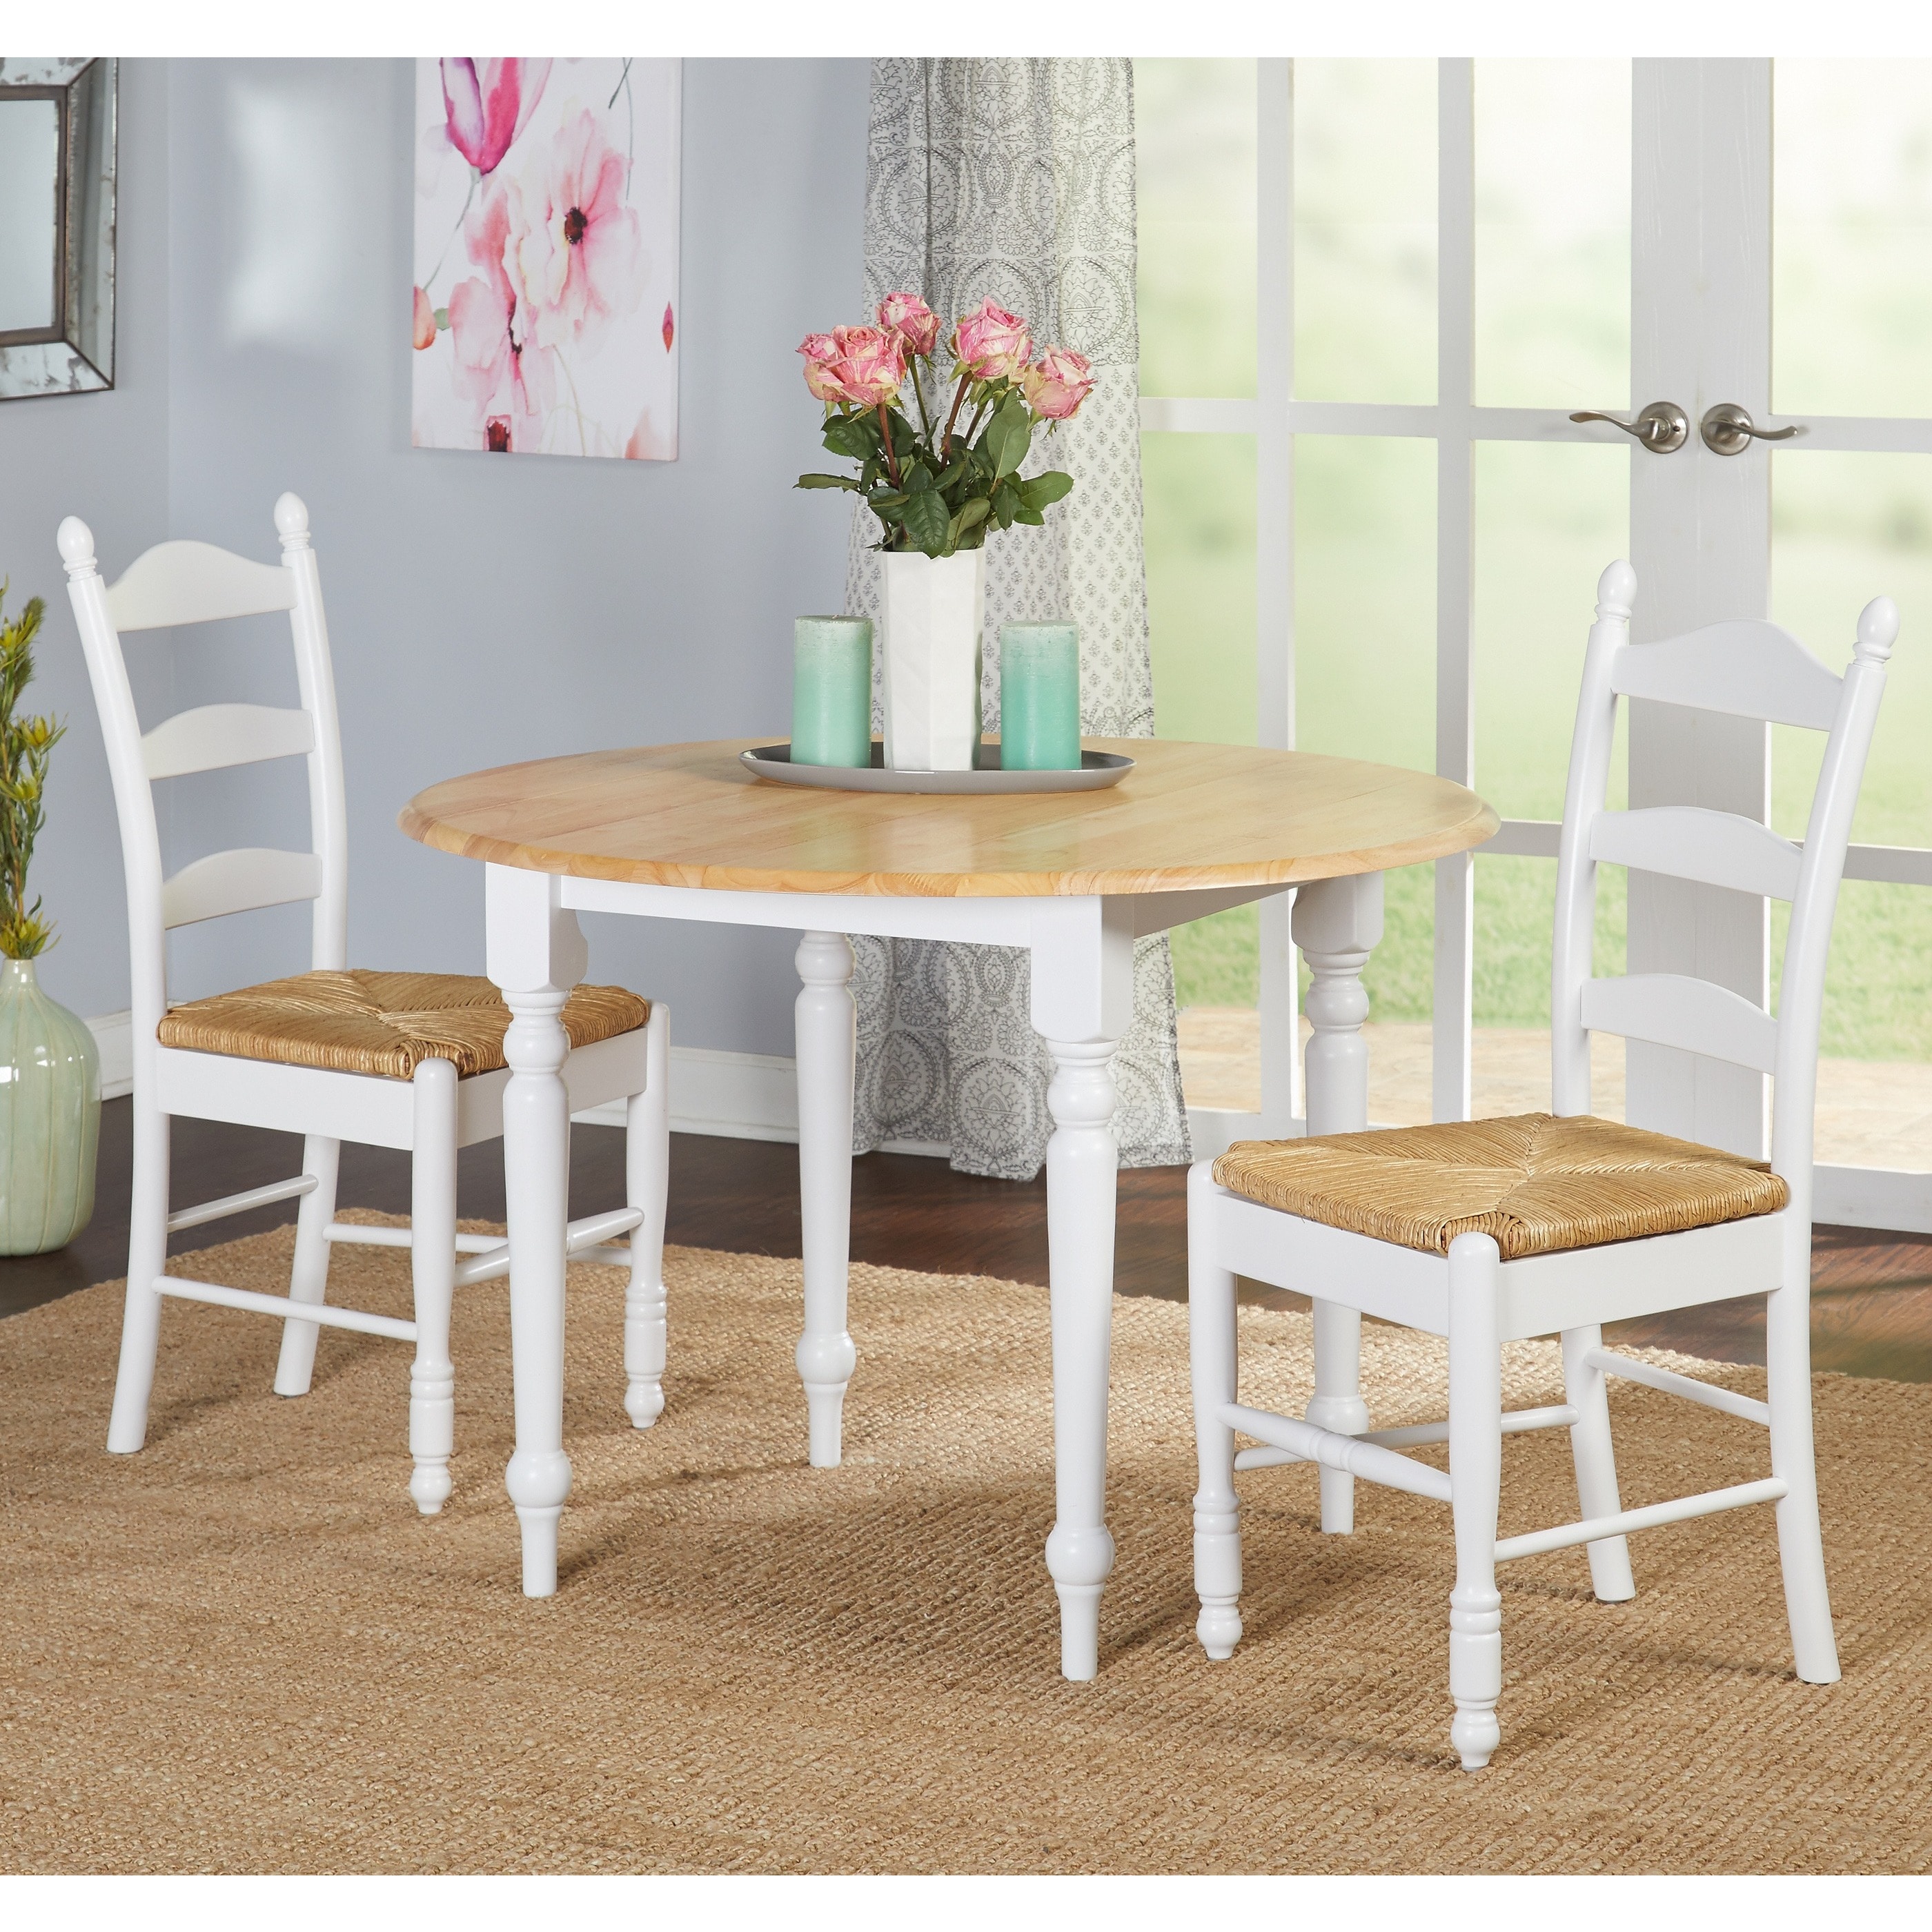 White Wood and Rush 3 piece Ladderback Dining Set Today $276.39 Sale